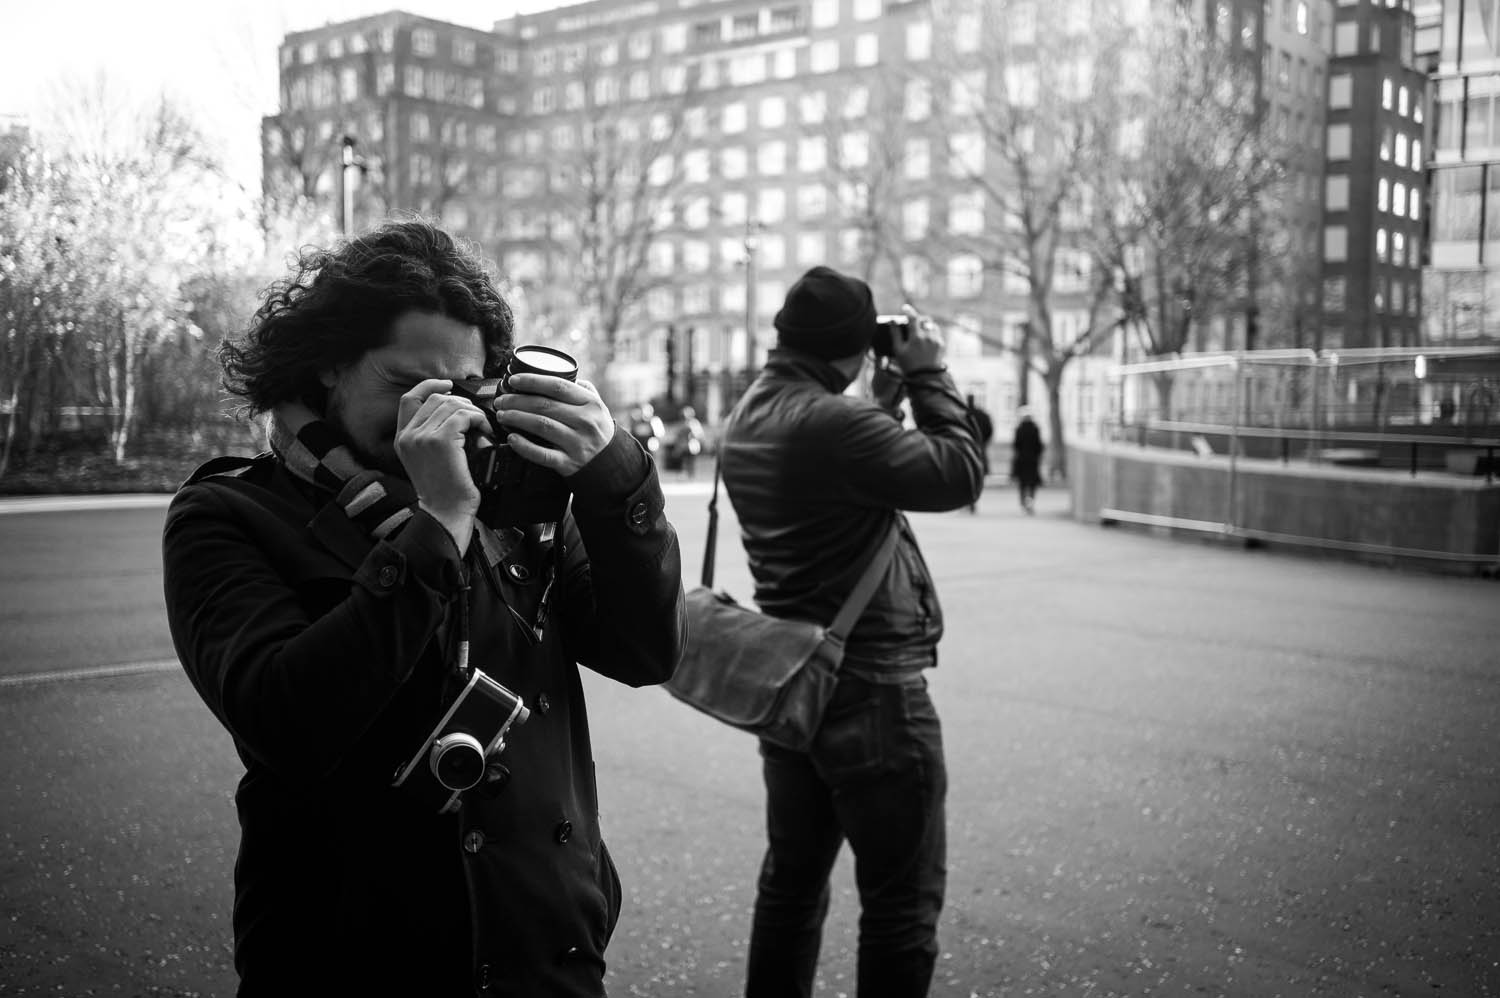 Richard Davies and Martin Smith photograph London with a Bronica-SQ and a Leica M6